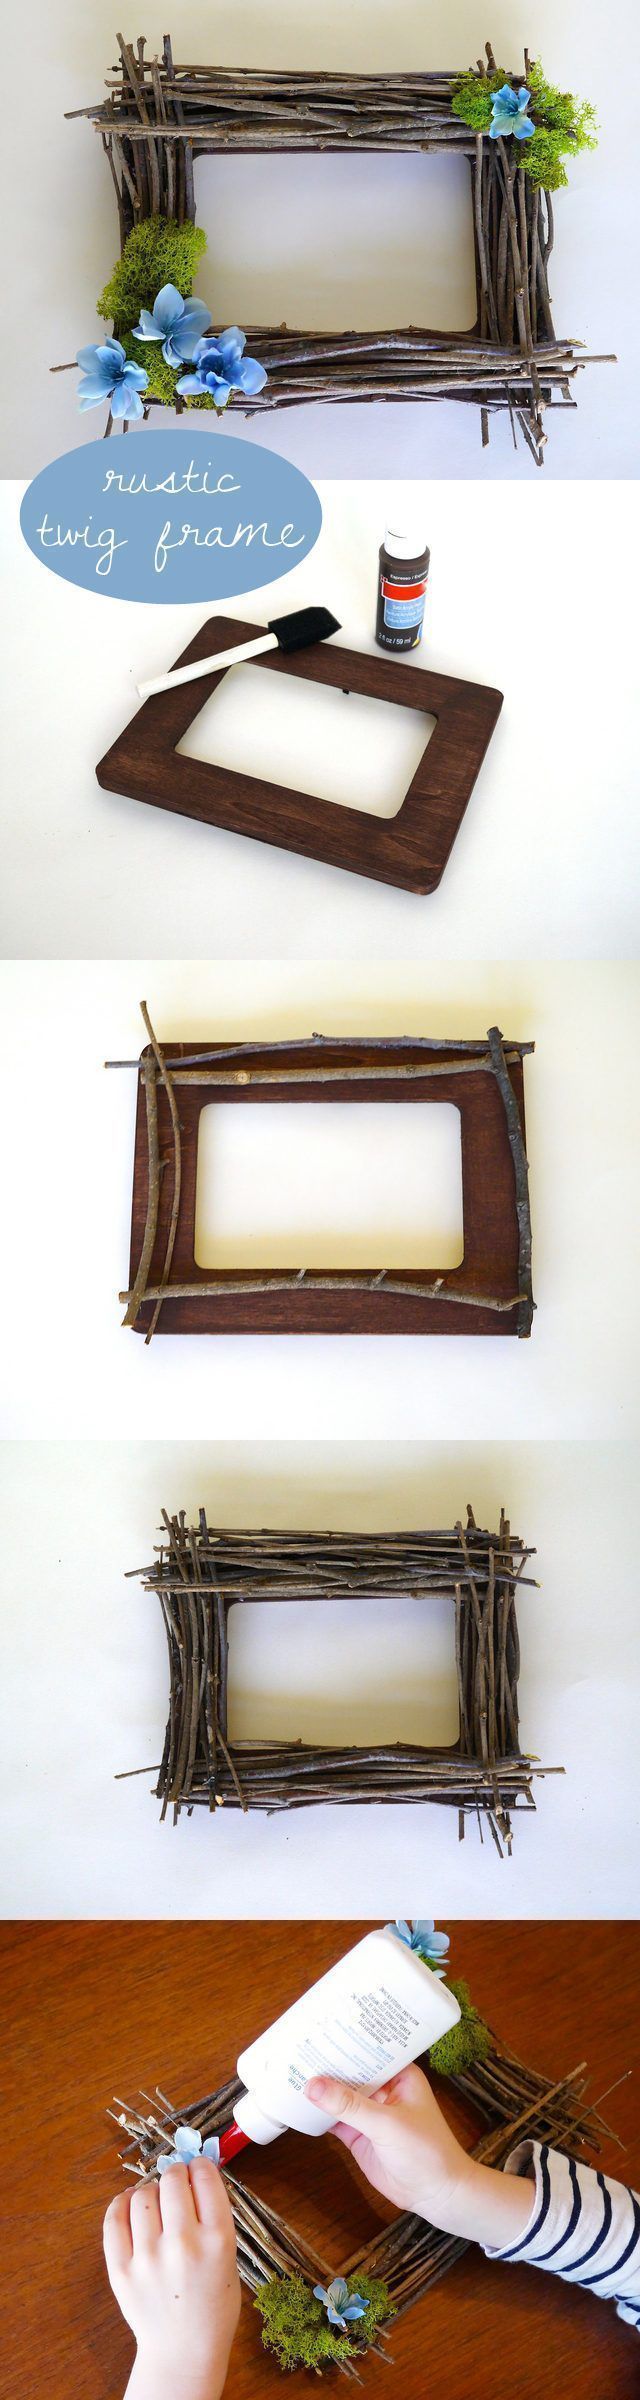 A great way to celebrate spring! This rustic twig frame is a great afternoon crafts project for the kids and is really cheap.